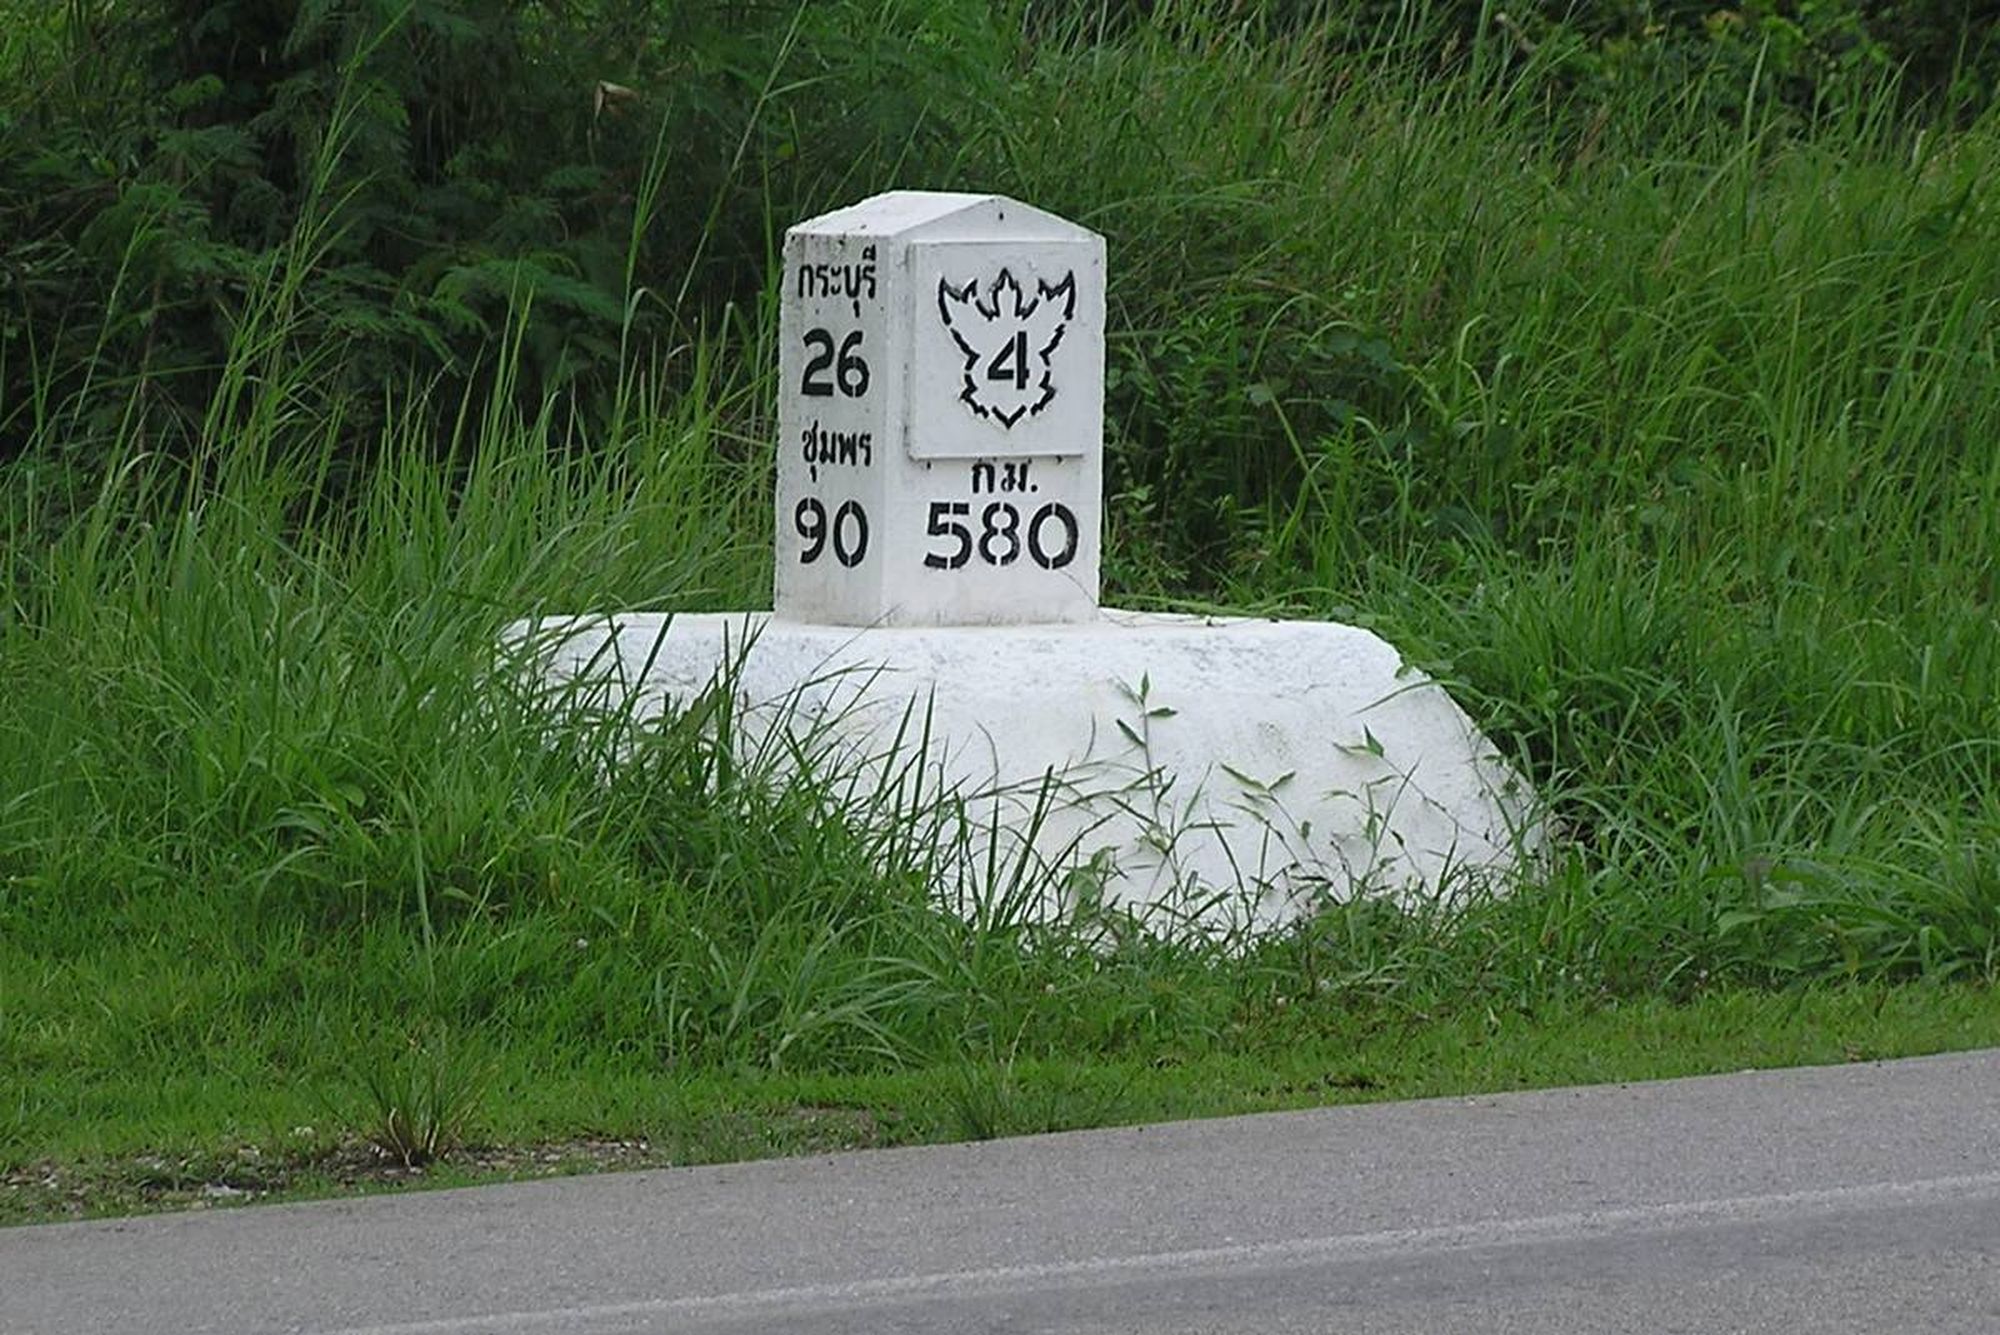 We know we are on highway 4 when we spot this marker.